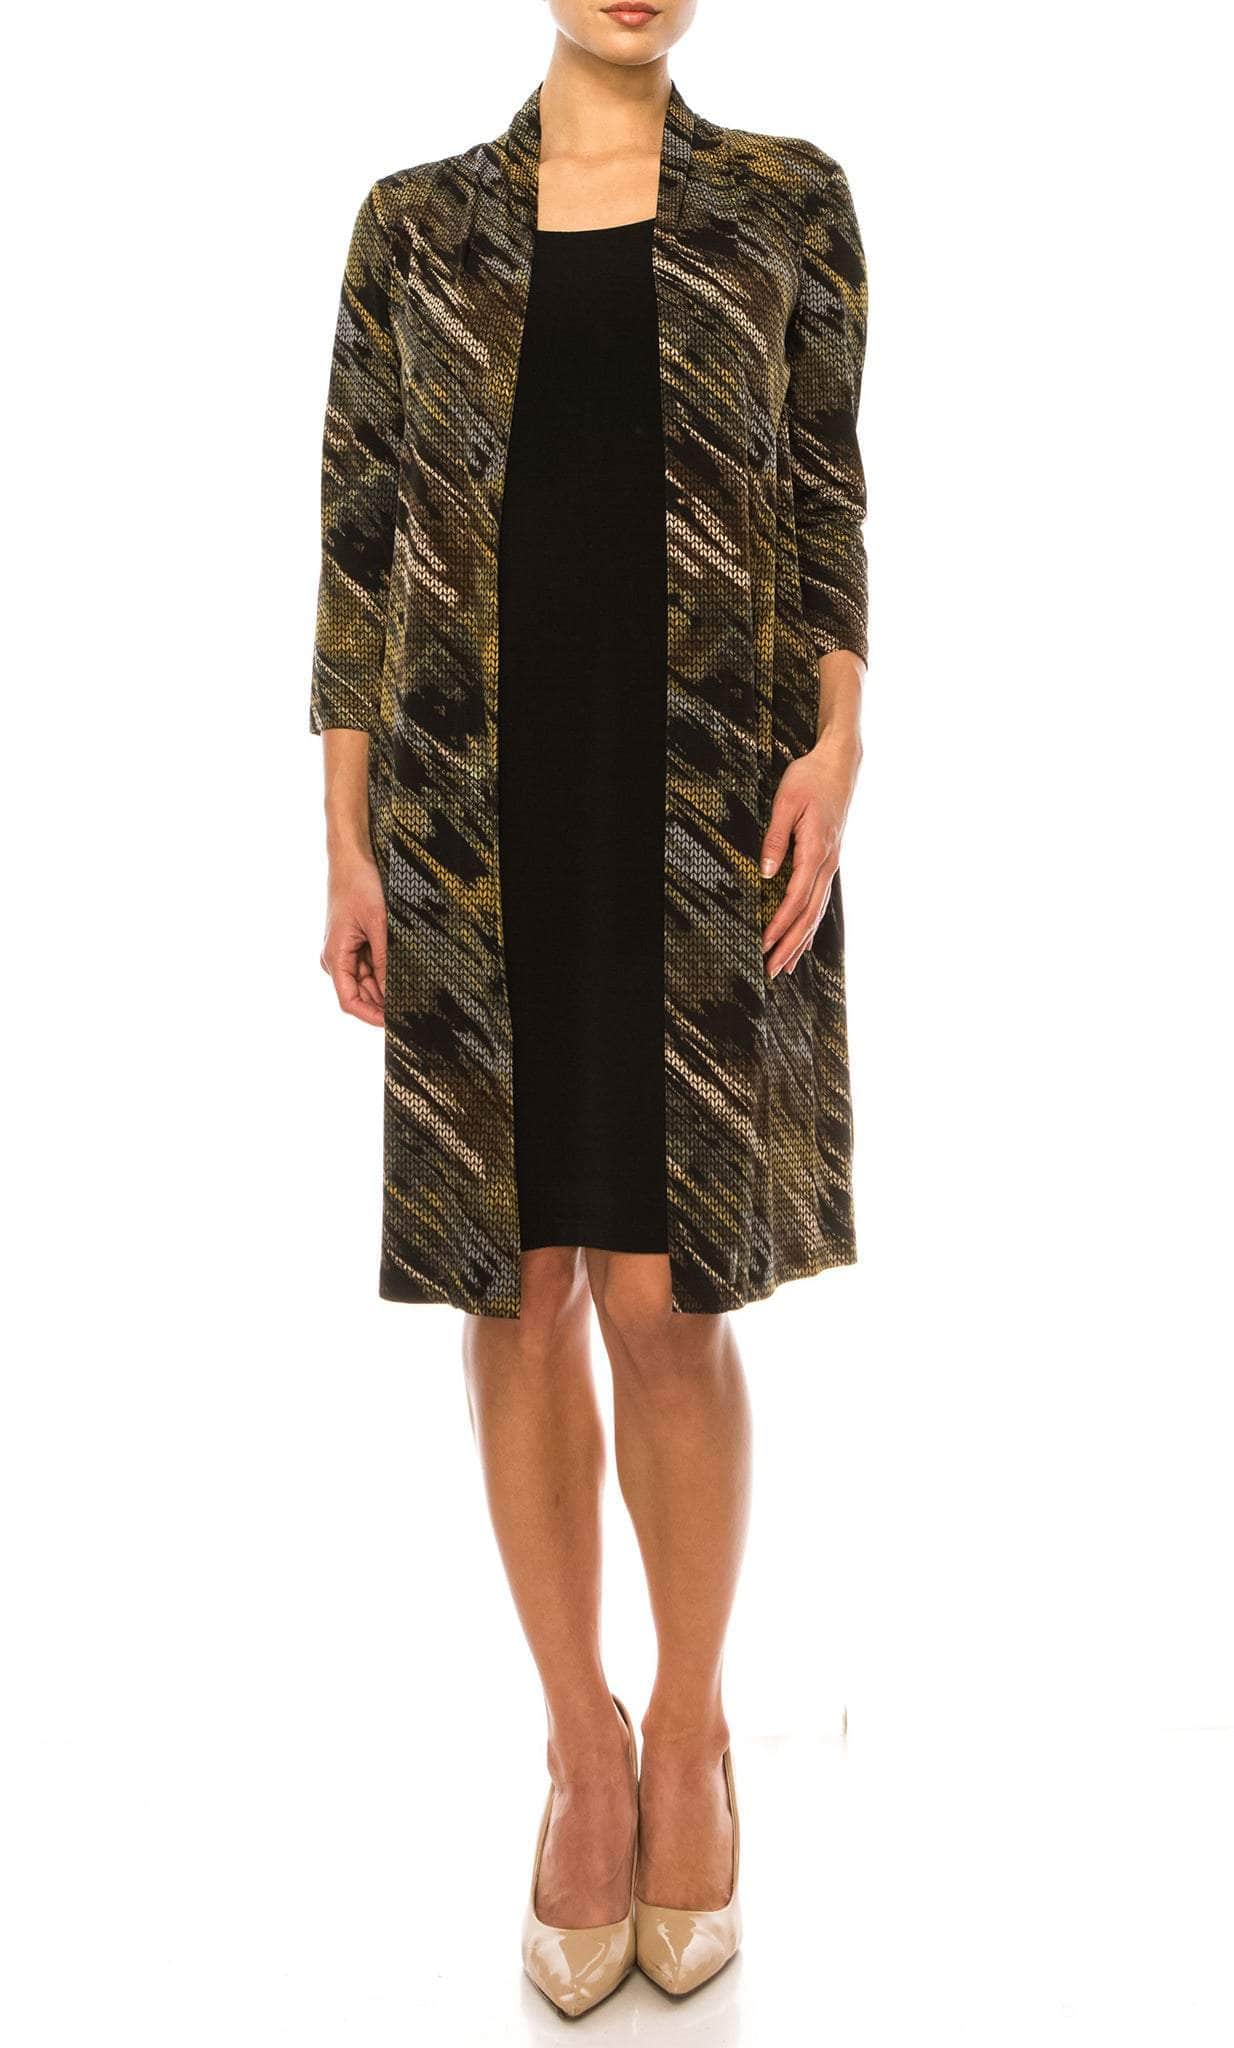 Image of Connected Apparel TGL70975 - Abstract Print Faux Jacket Dress